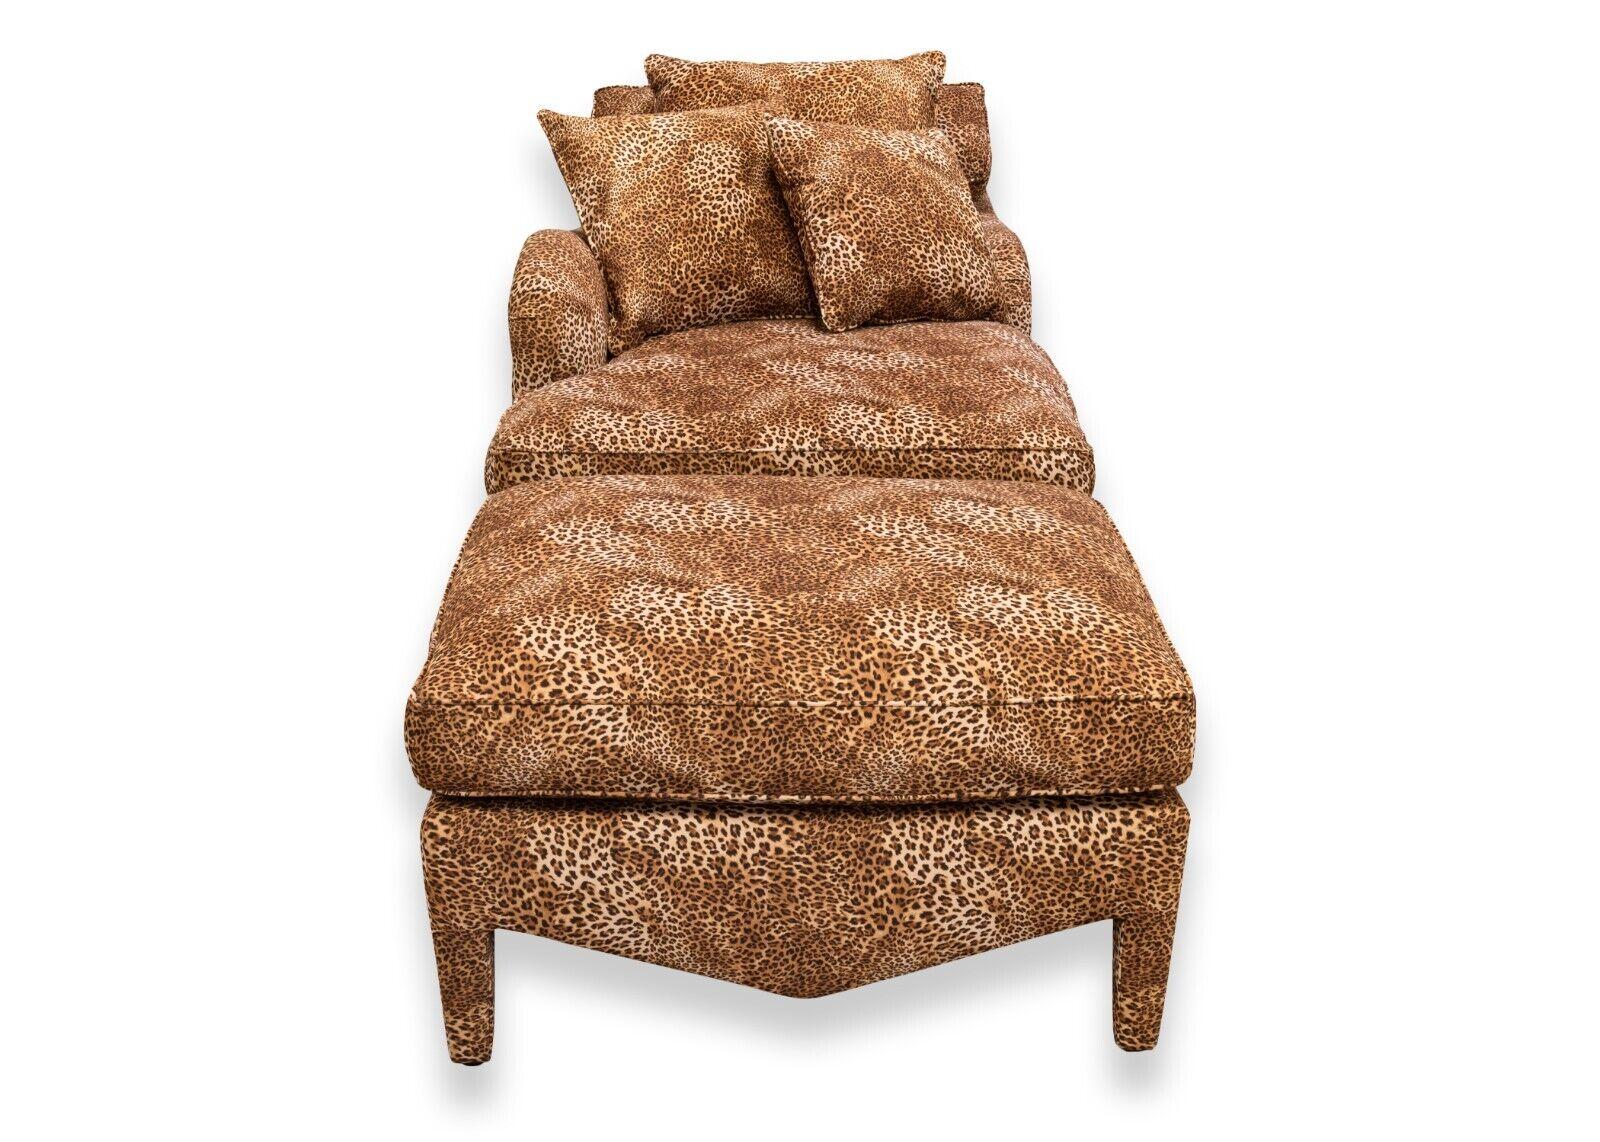 Pair of Donghia Leopard Print Left and Right Hand Chaise with Matching Ottomans 1